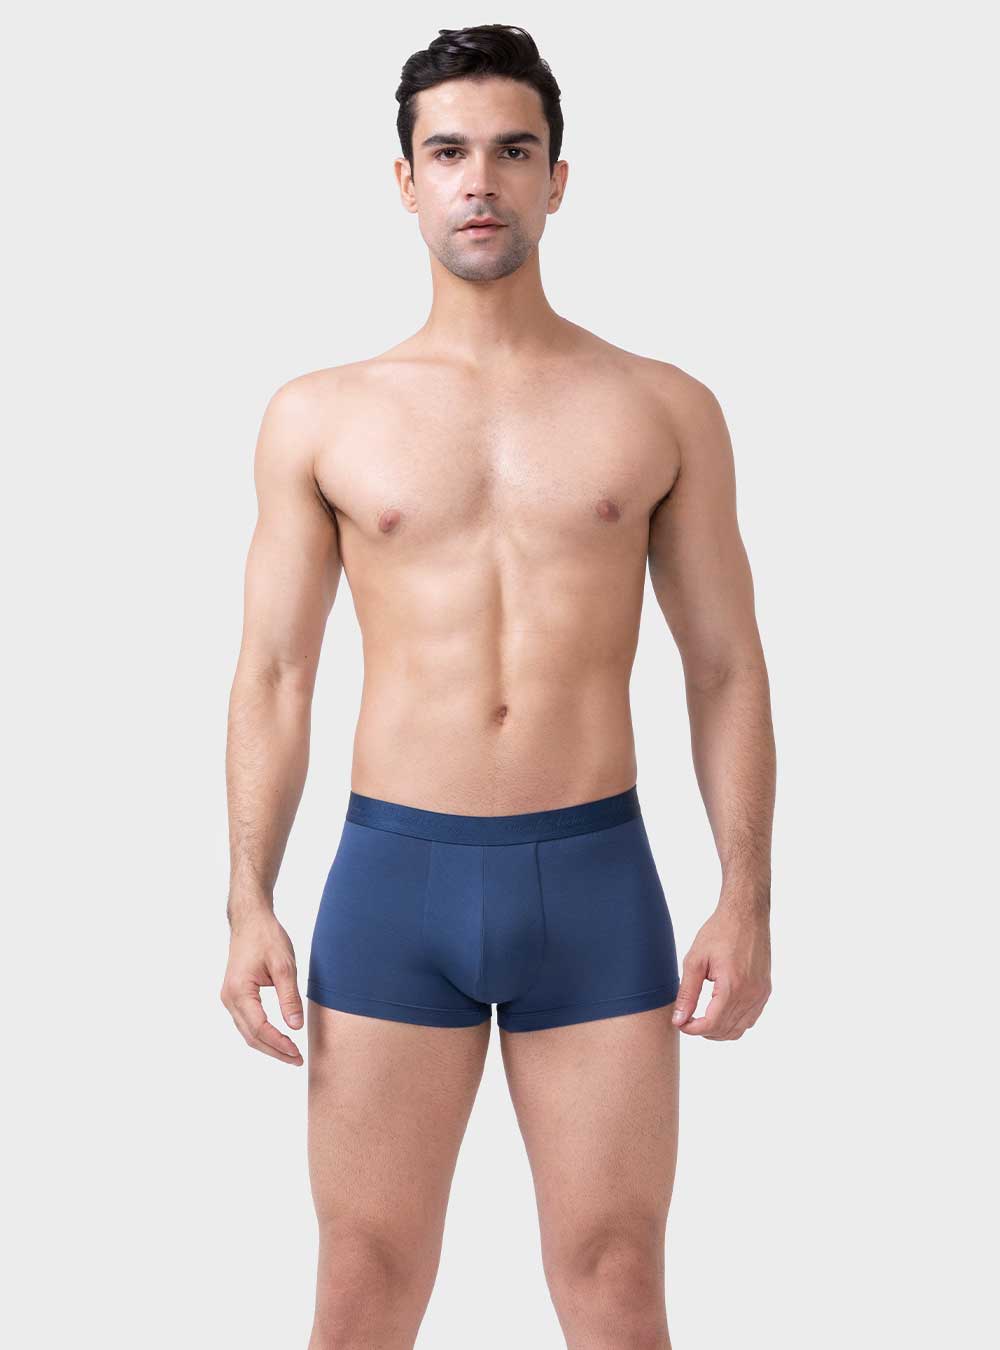 DAVID ARCHY Men's Underwear Micro Modal Dual Pouch Trunks Ball Pouch Bulge  Enhancing Boxer Briefs For Men 3 Or 4 Pack(M, Black/Dark Gray/Navy  Blue/Wine) on Galleon Philippines